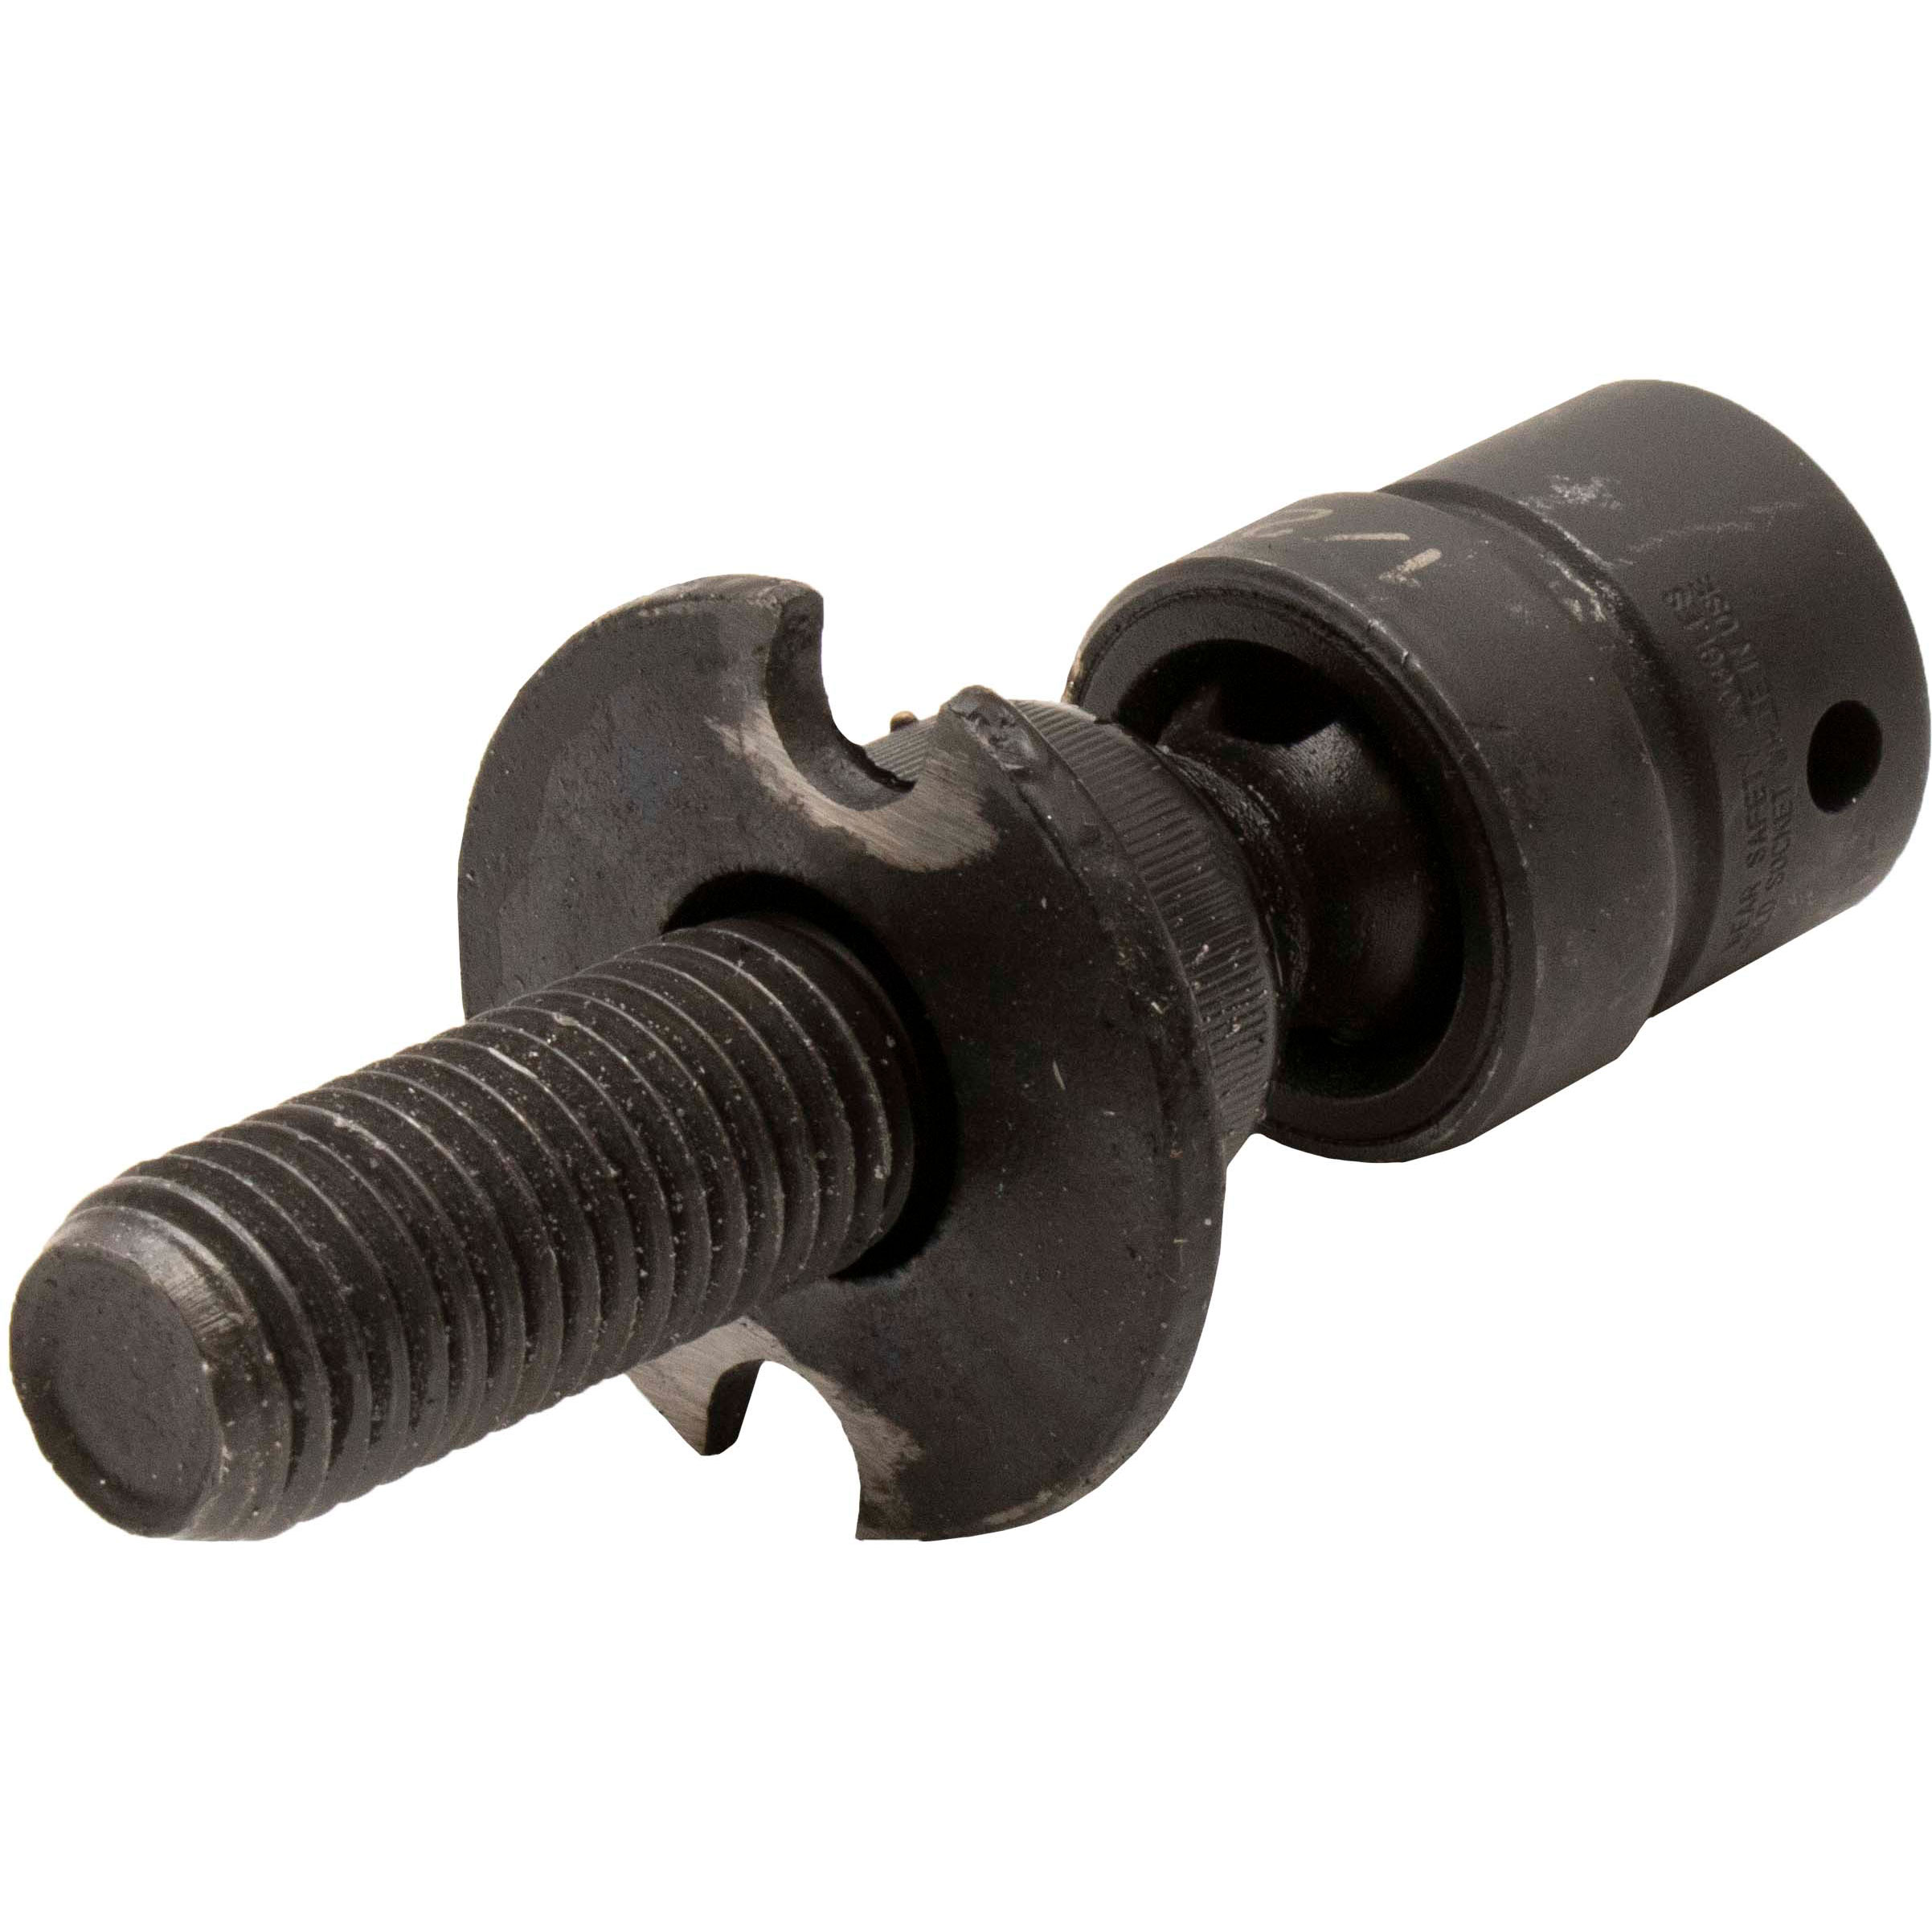 Marshalltown SPNLER Spin Screed Live End Replacement Universal Joint SPNLER